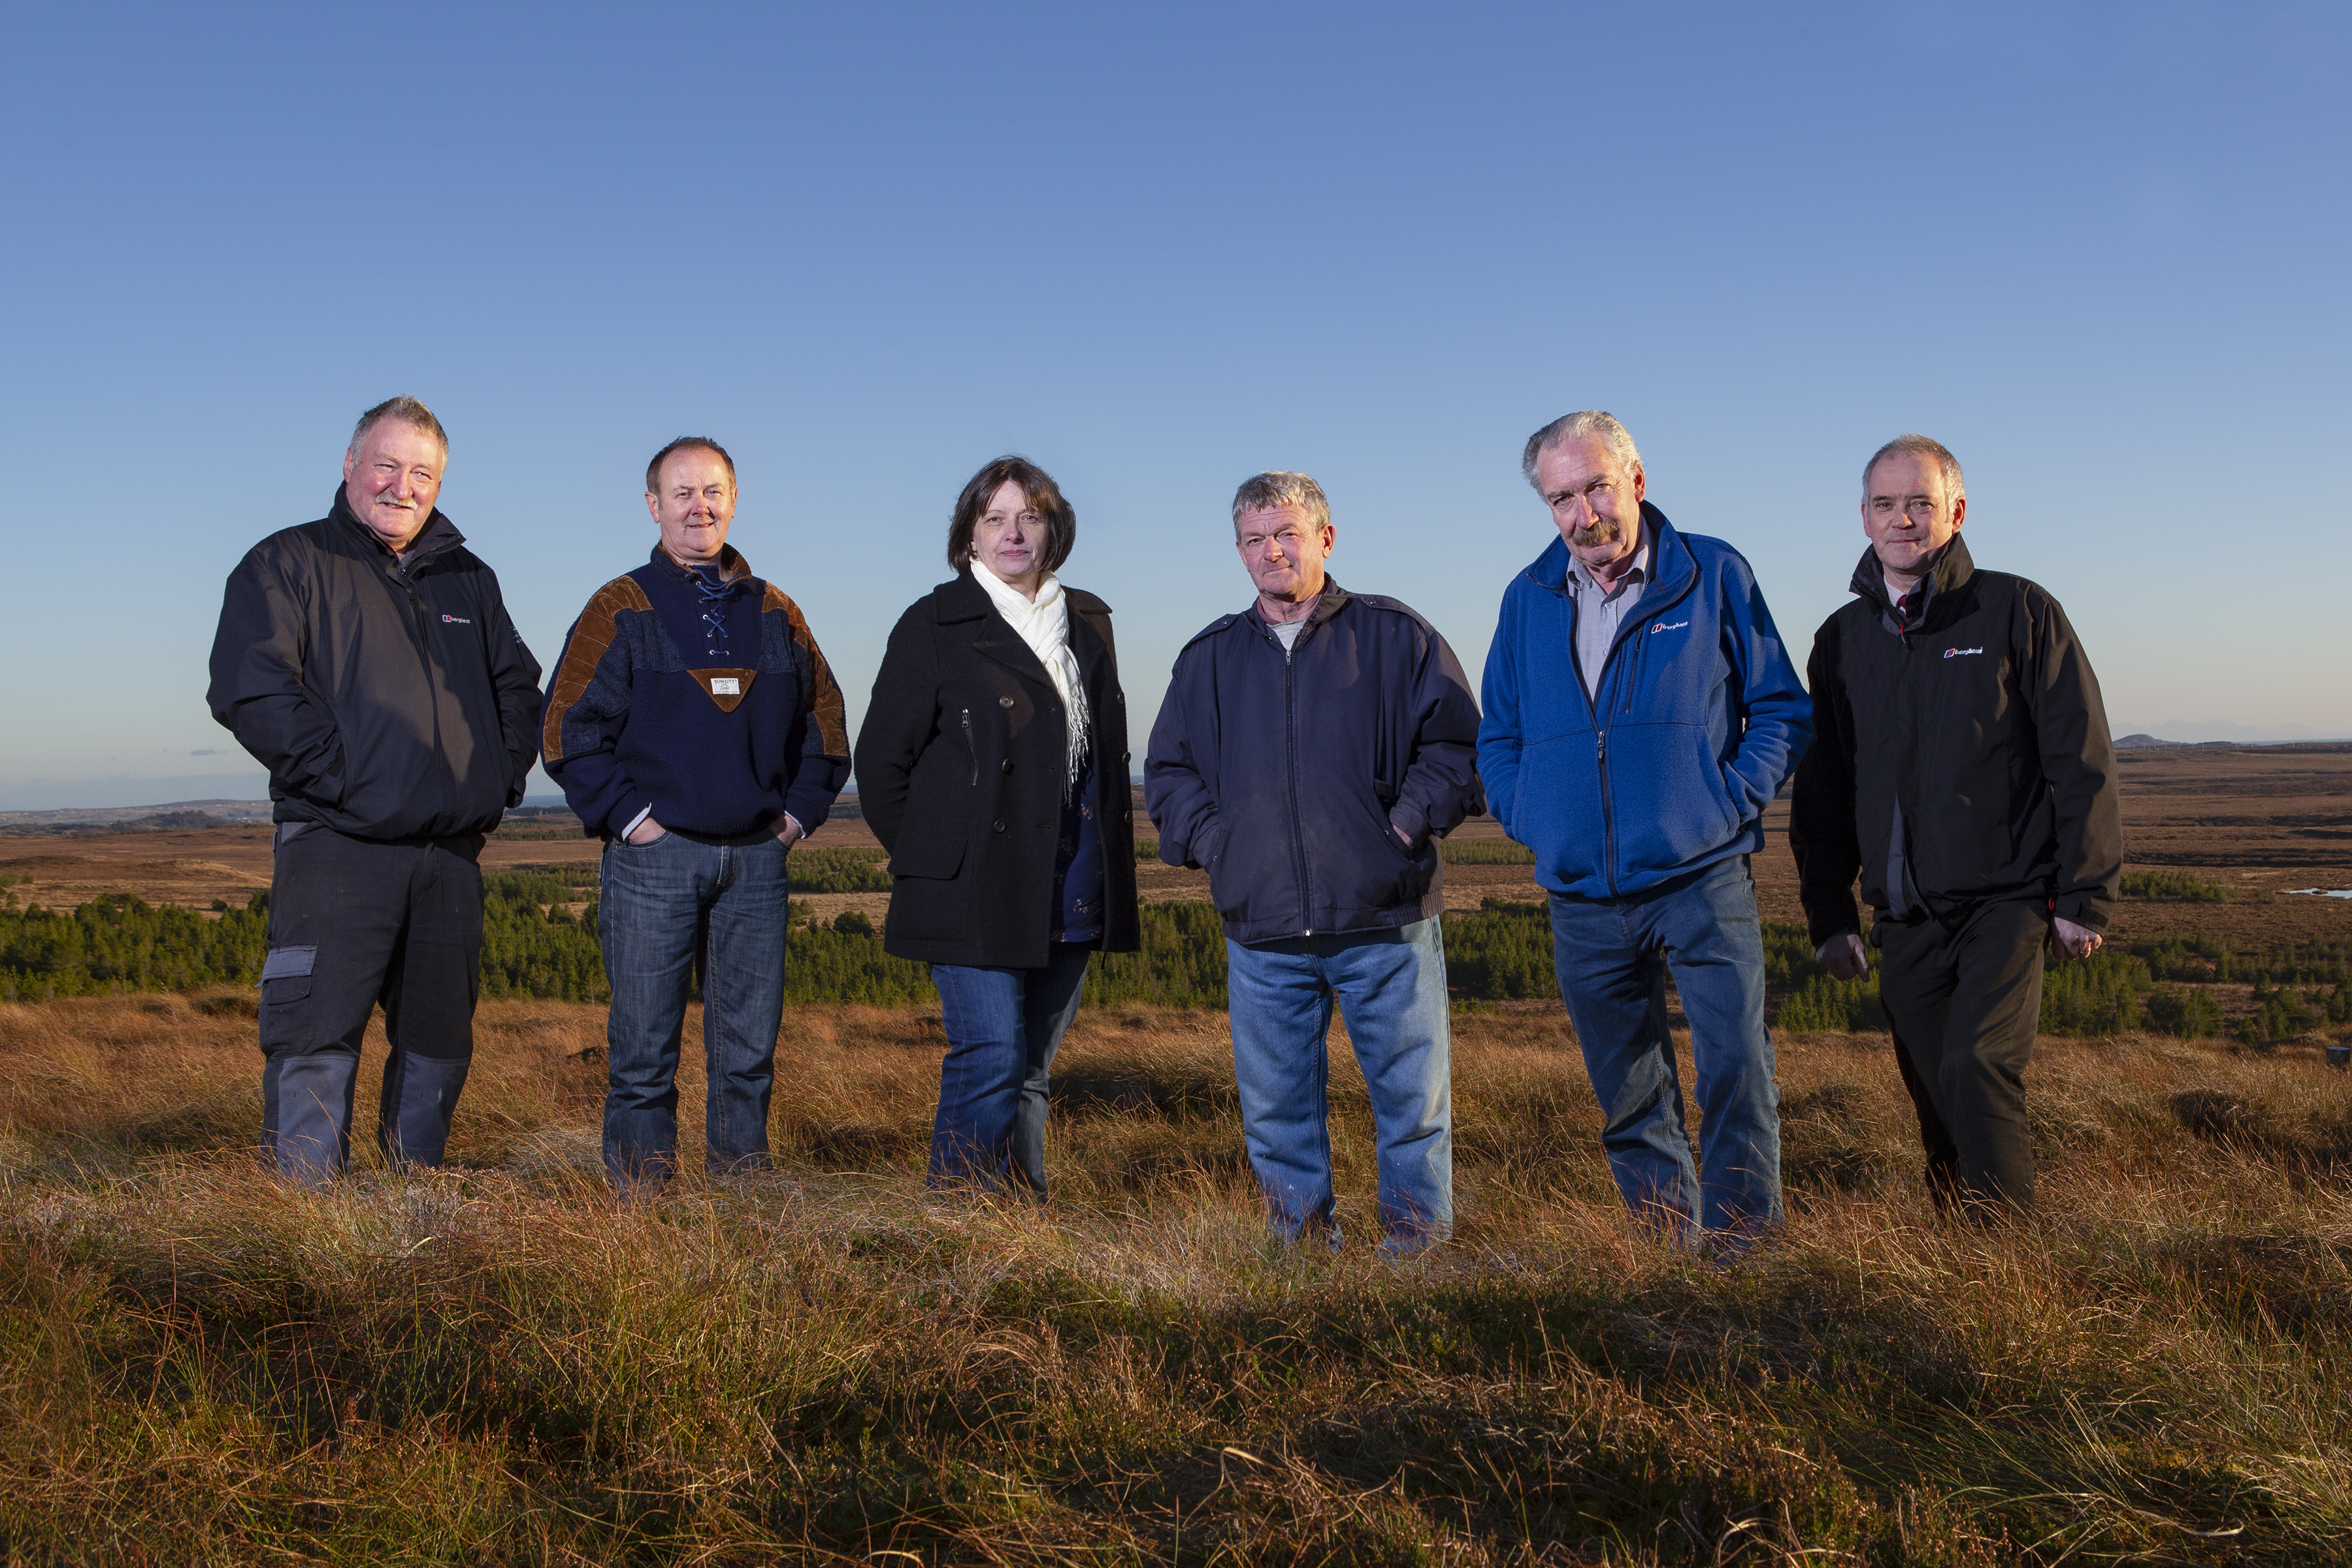 Sandie Maciver of Sandie Photos

Representatives from the crofting townships who have made a windfarm application. From left to right: Angus Campbell from Melbost and Branahuie, Donnie MacDonald from Aignish, Rhoda Mackenzie from Sandwick North Street and Murdo Macleod, Calum Buchanan and Kenny Morrison, all from Sandwick East Street and Lower Sandwick.